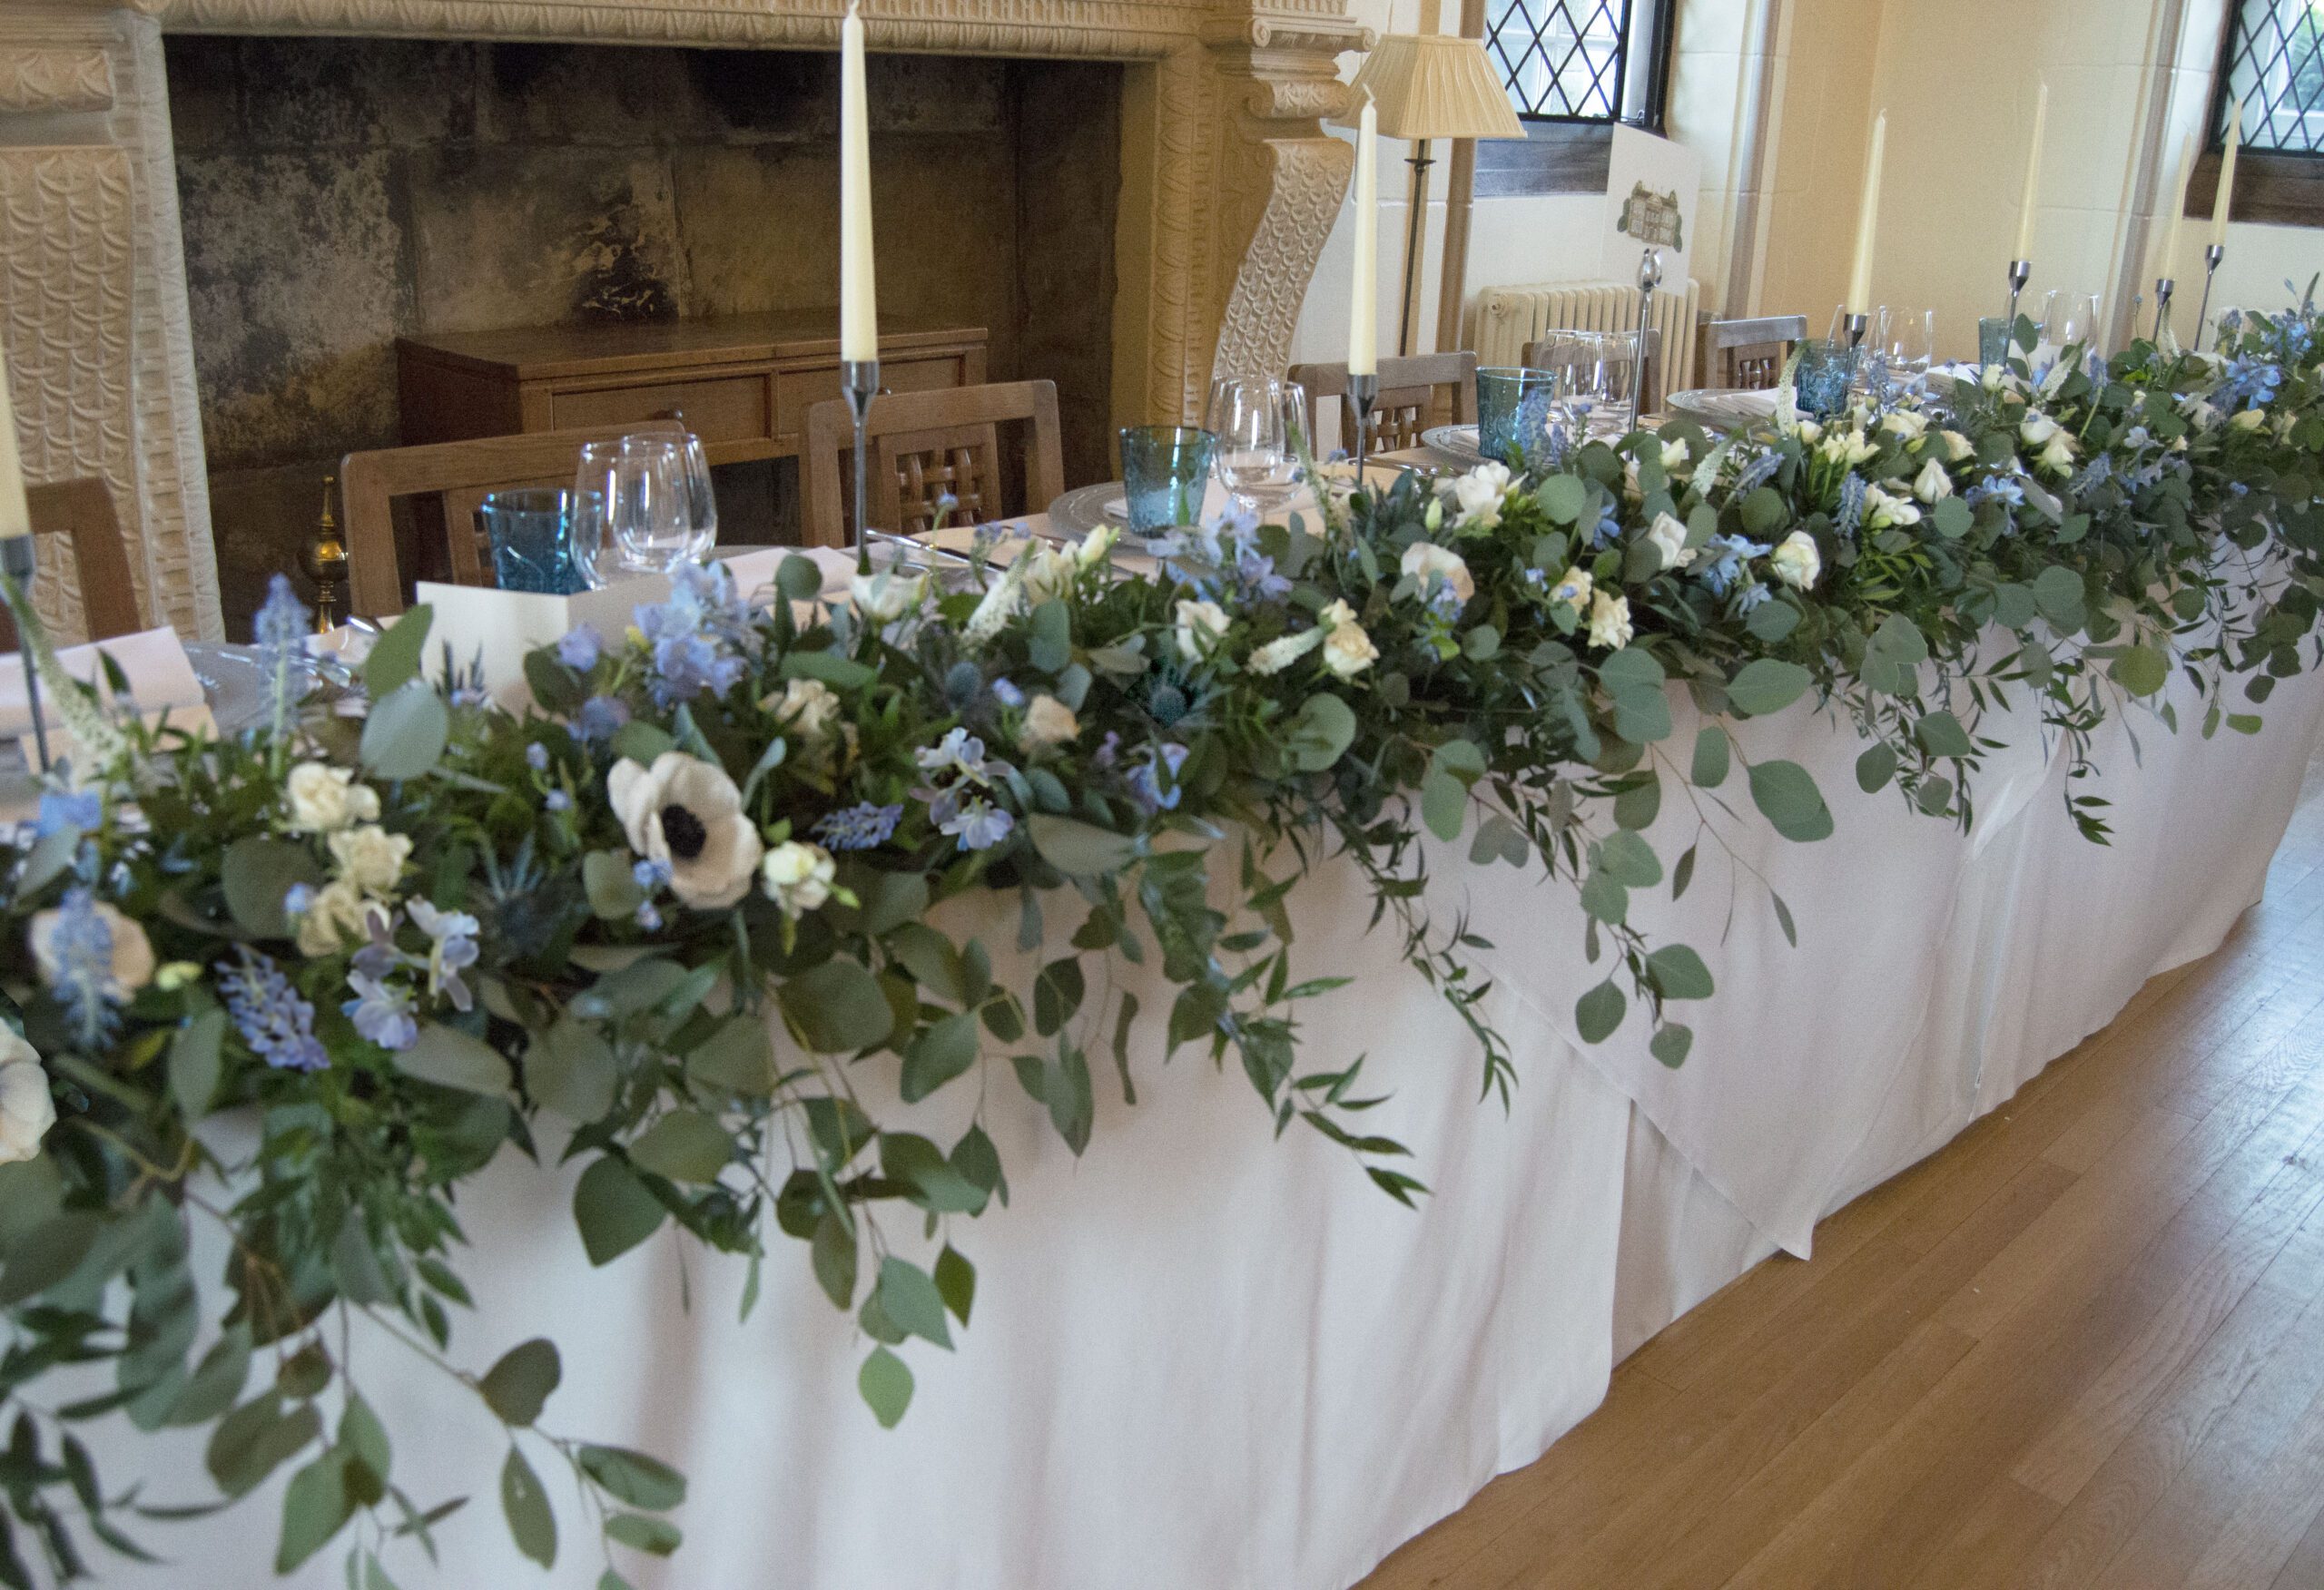 top-table-flowing-foliage-and-ffowers-leeds-florist-wedding-scaled Grid No Space 5 Columns